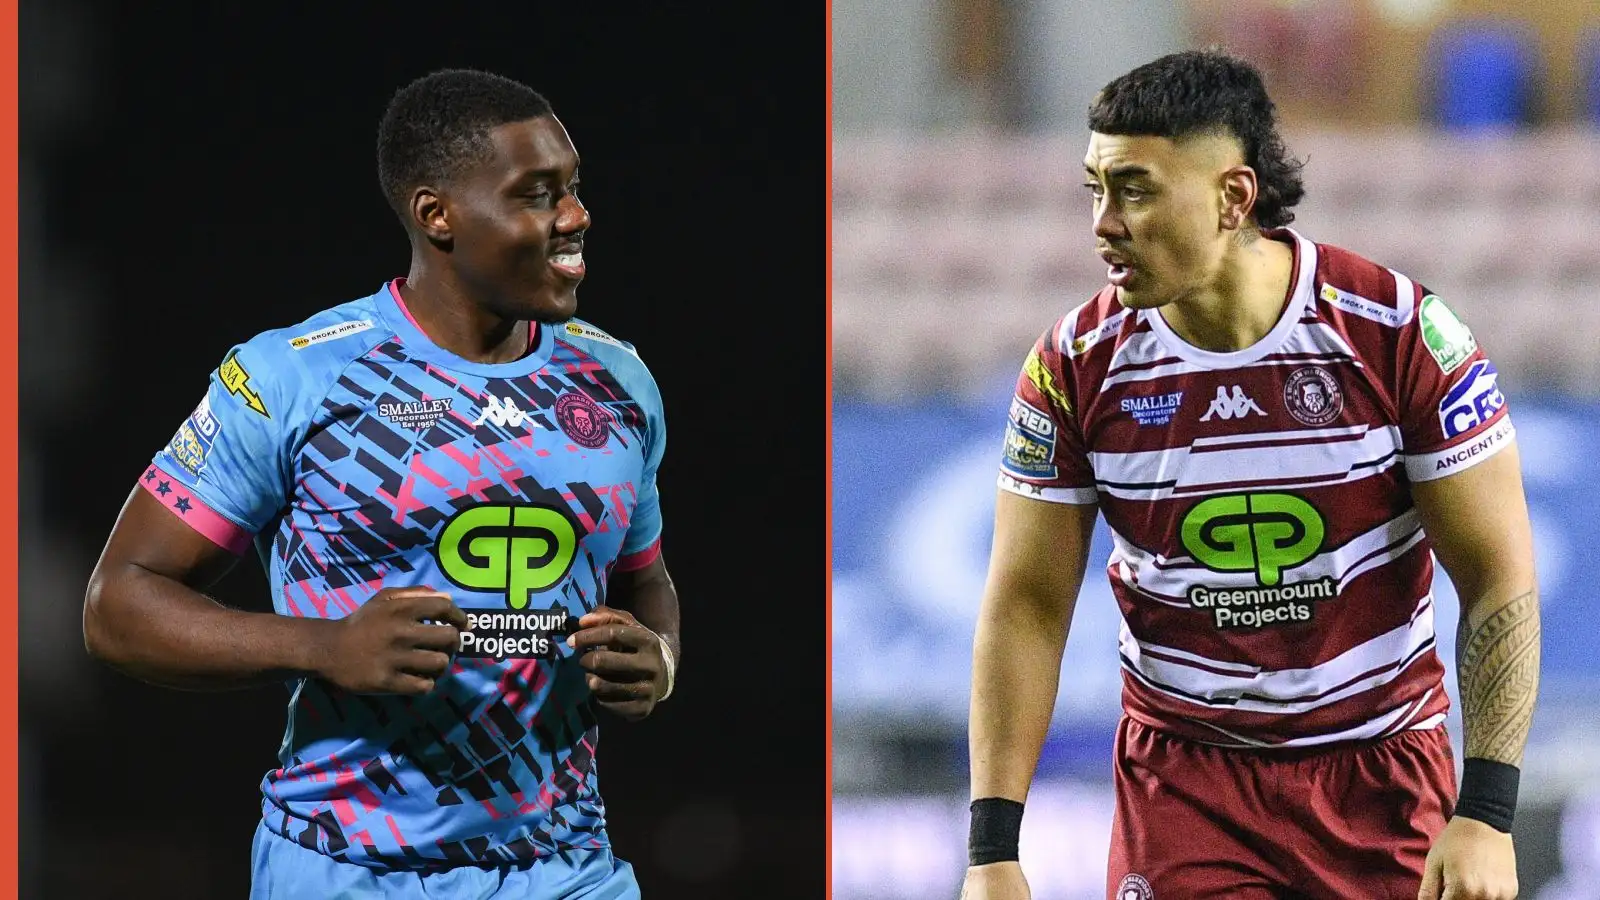 Wigan Warriors boss confirms duo loaned to Hull FC and Castleford Tigers